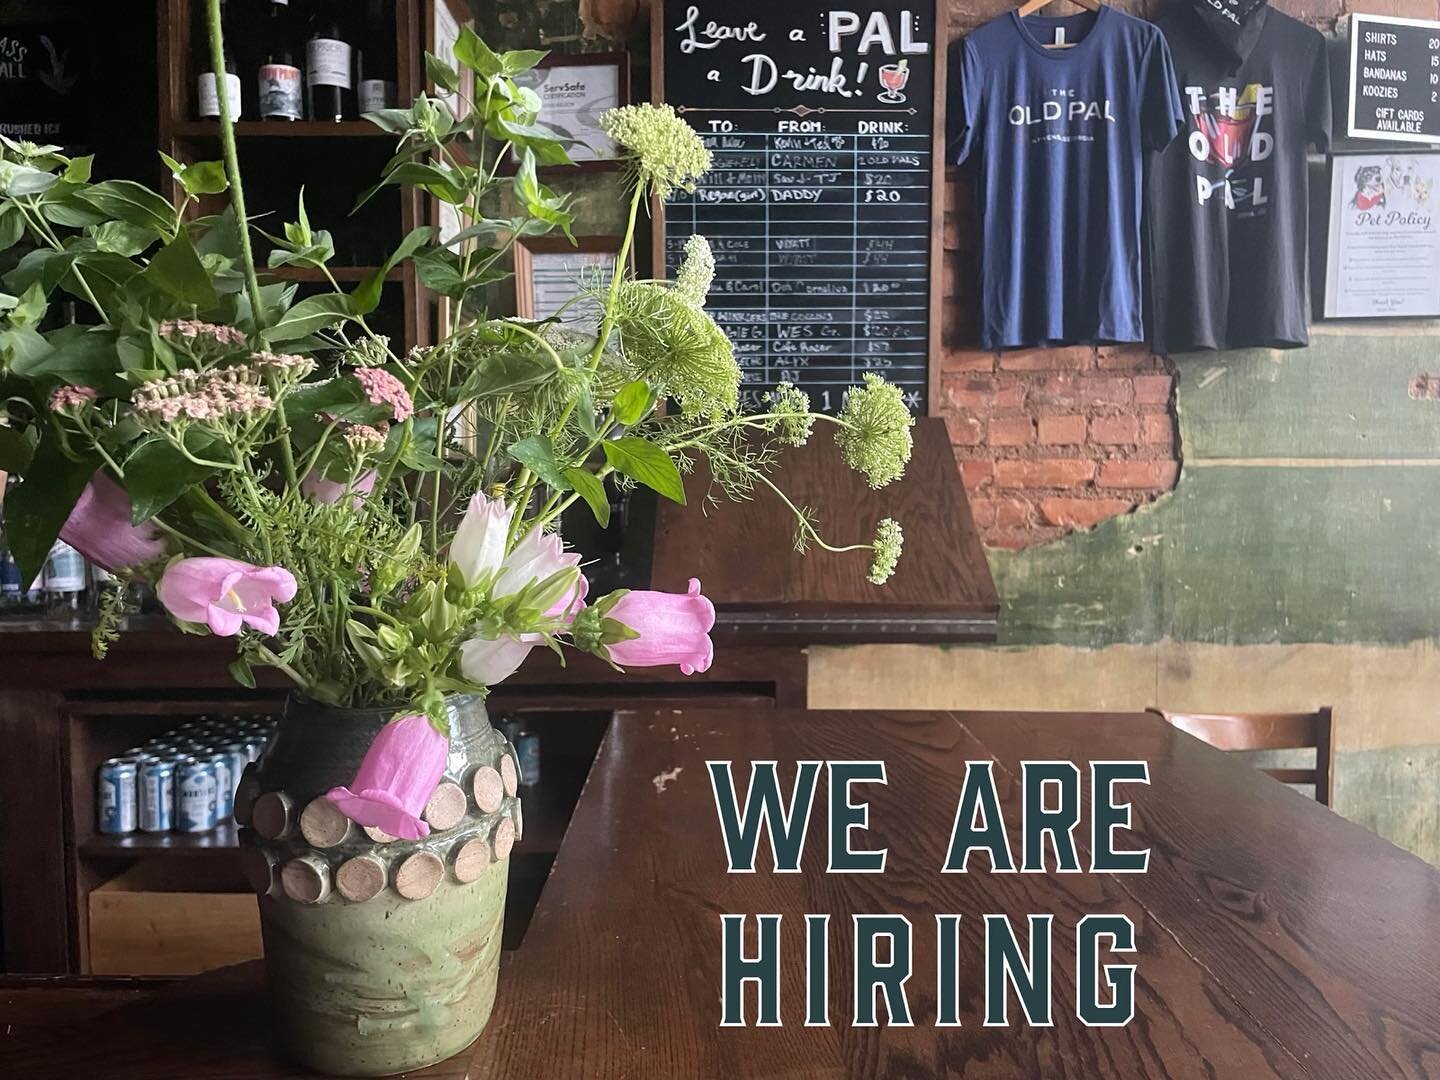 We are hiring bartenders! Some cocktail experience preferred, positive attitude required, seeking 2-3 shifts per week on a set schedule. Inquire via DM or email at theoldpalathens@gmail.com &mdash; we&rsquo;d love to have you join the team!